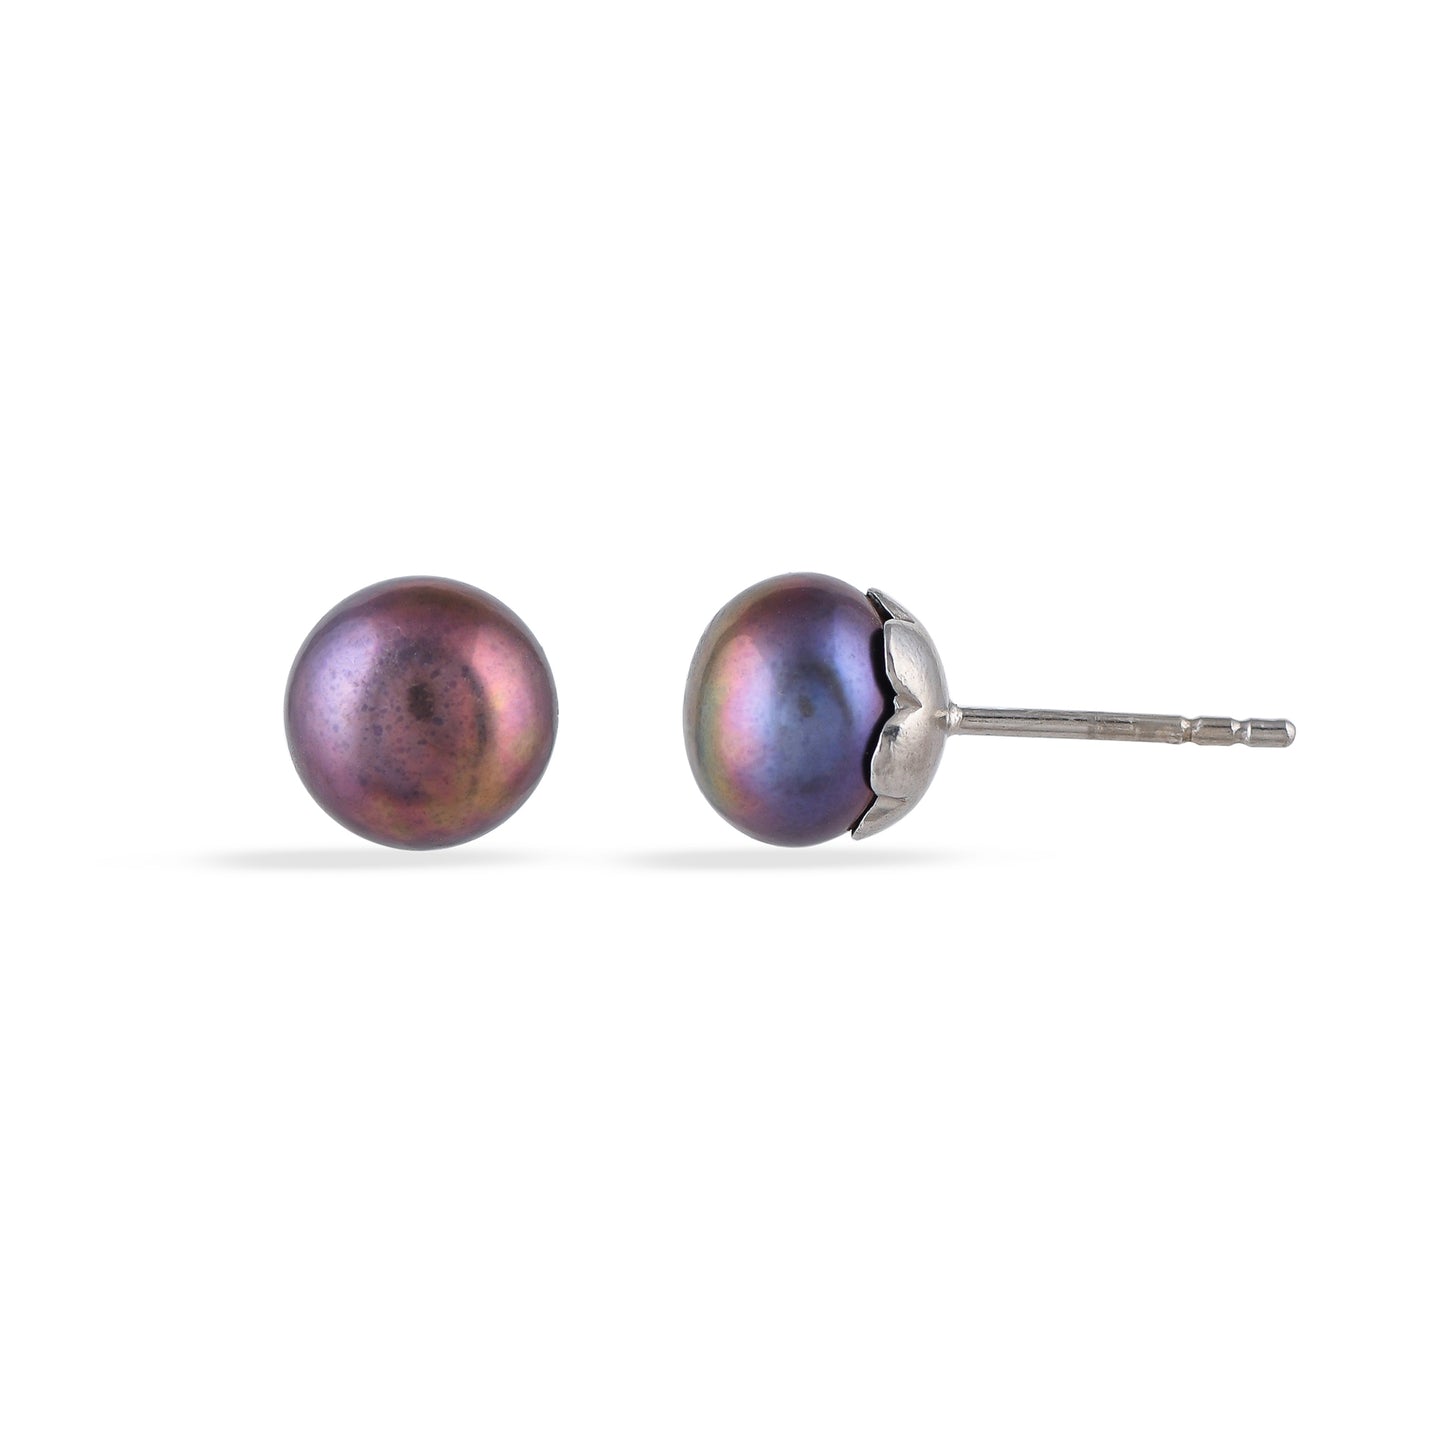 Timeless Black Pearl Silver Earrings - From Purl Purl